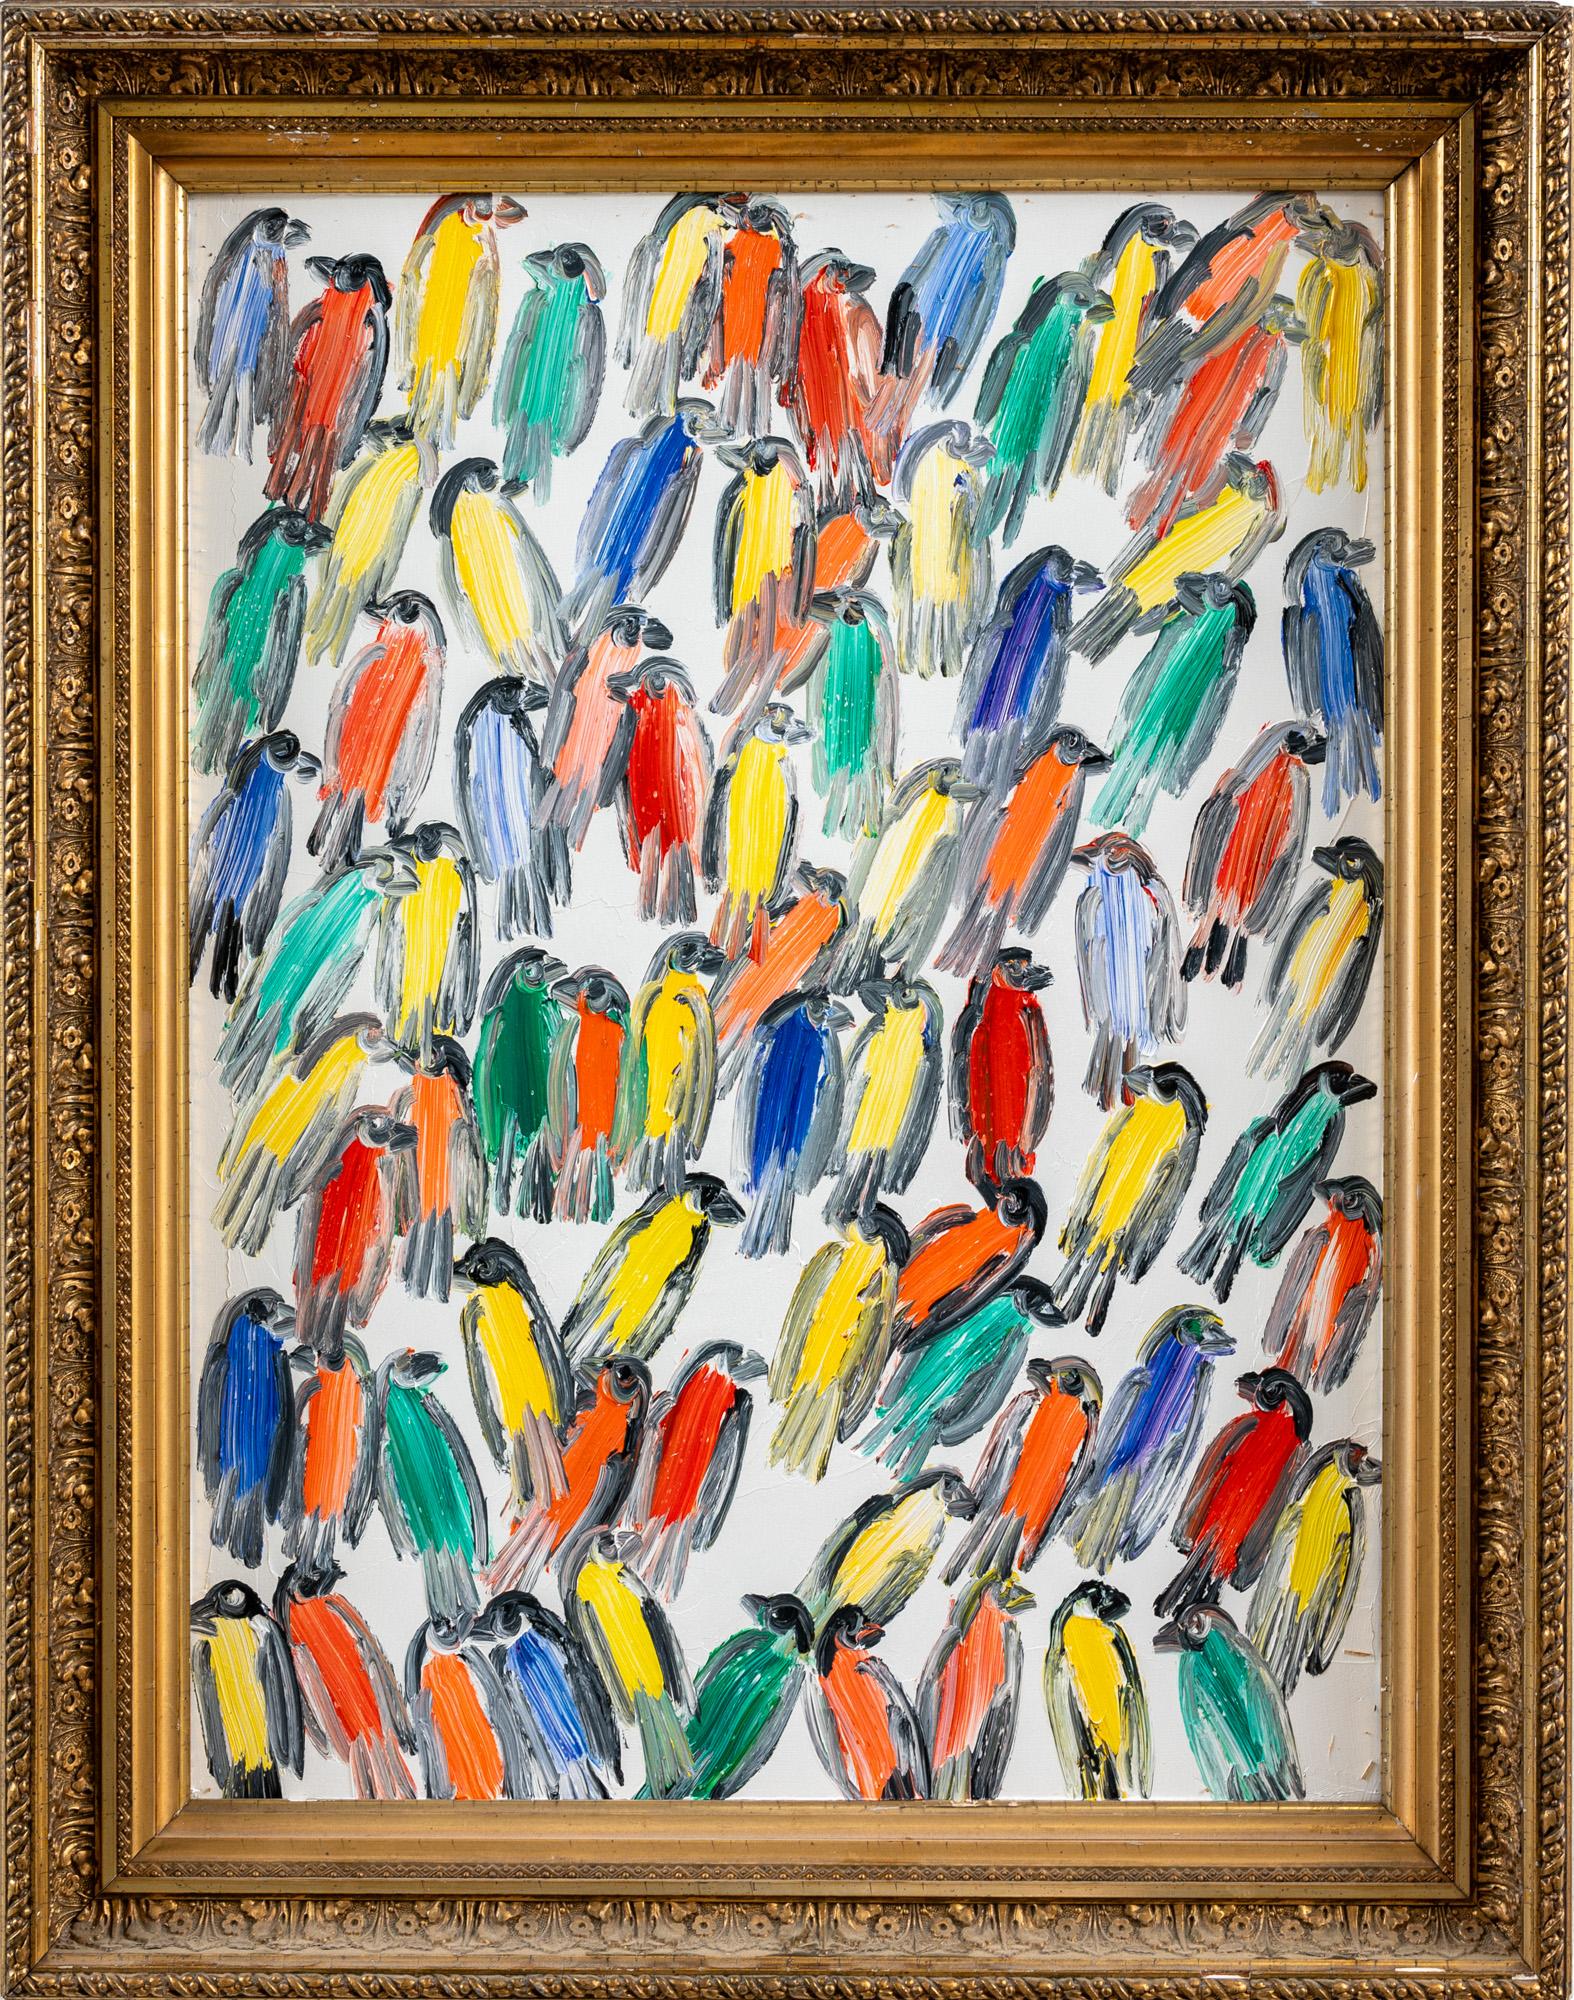 Hunt Slonem "Finches" Neo-Expressionist Birds Framed Oil on Wood Painting